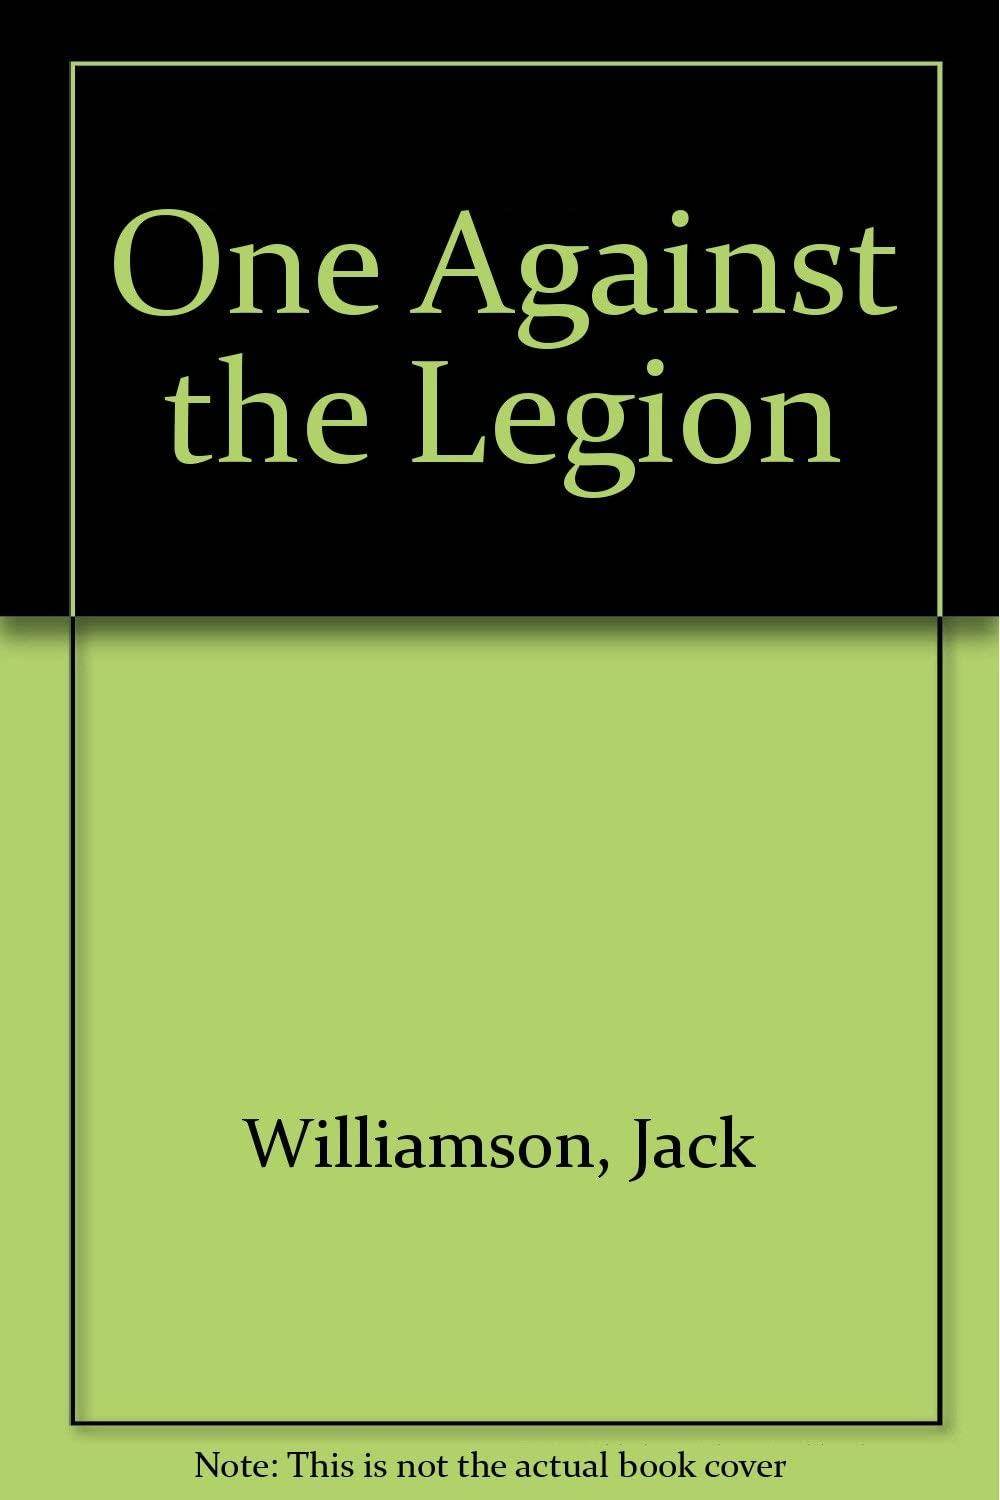 One Against the Legion